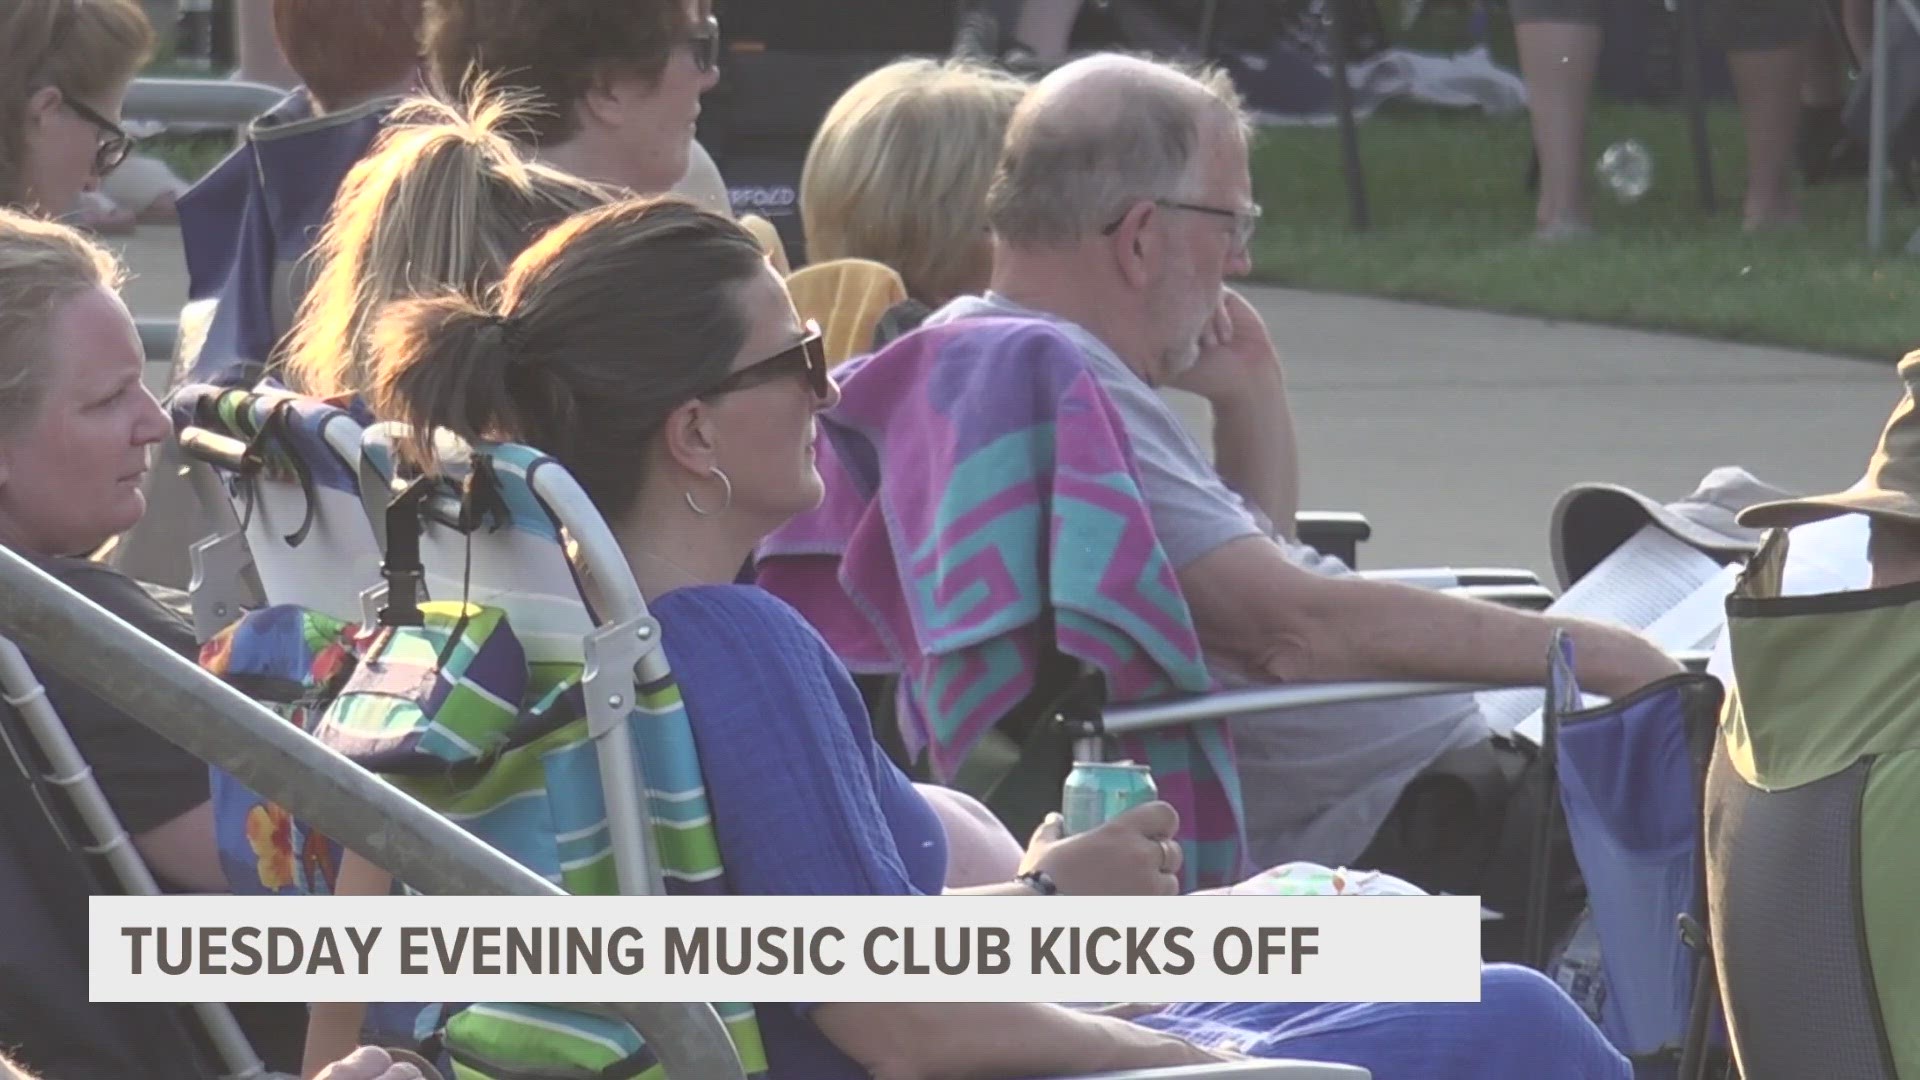 Hundreds of people in attendance were treated to a cultural experience on opening night.